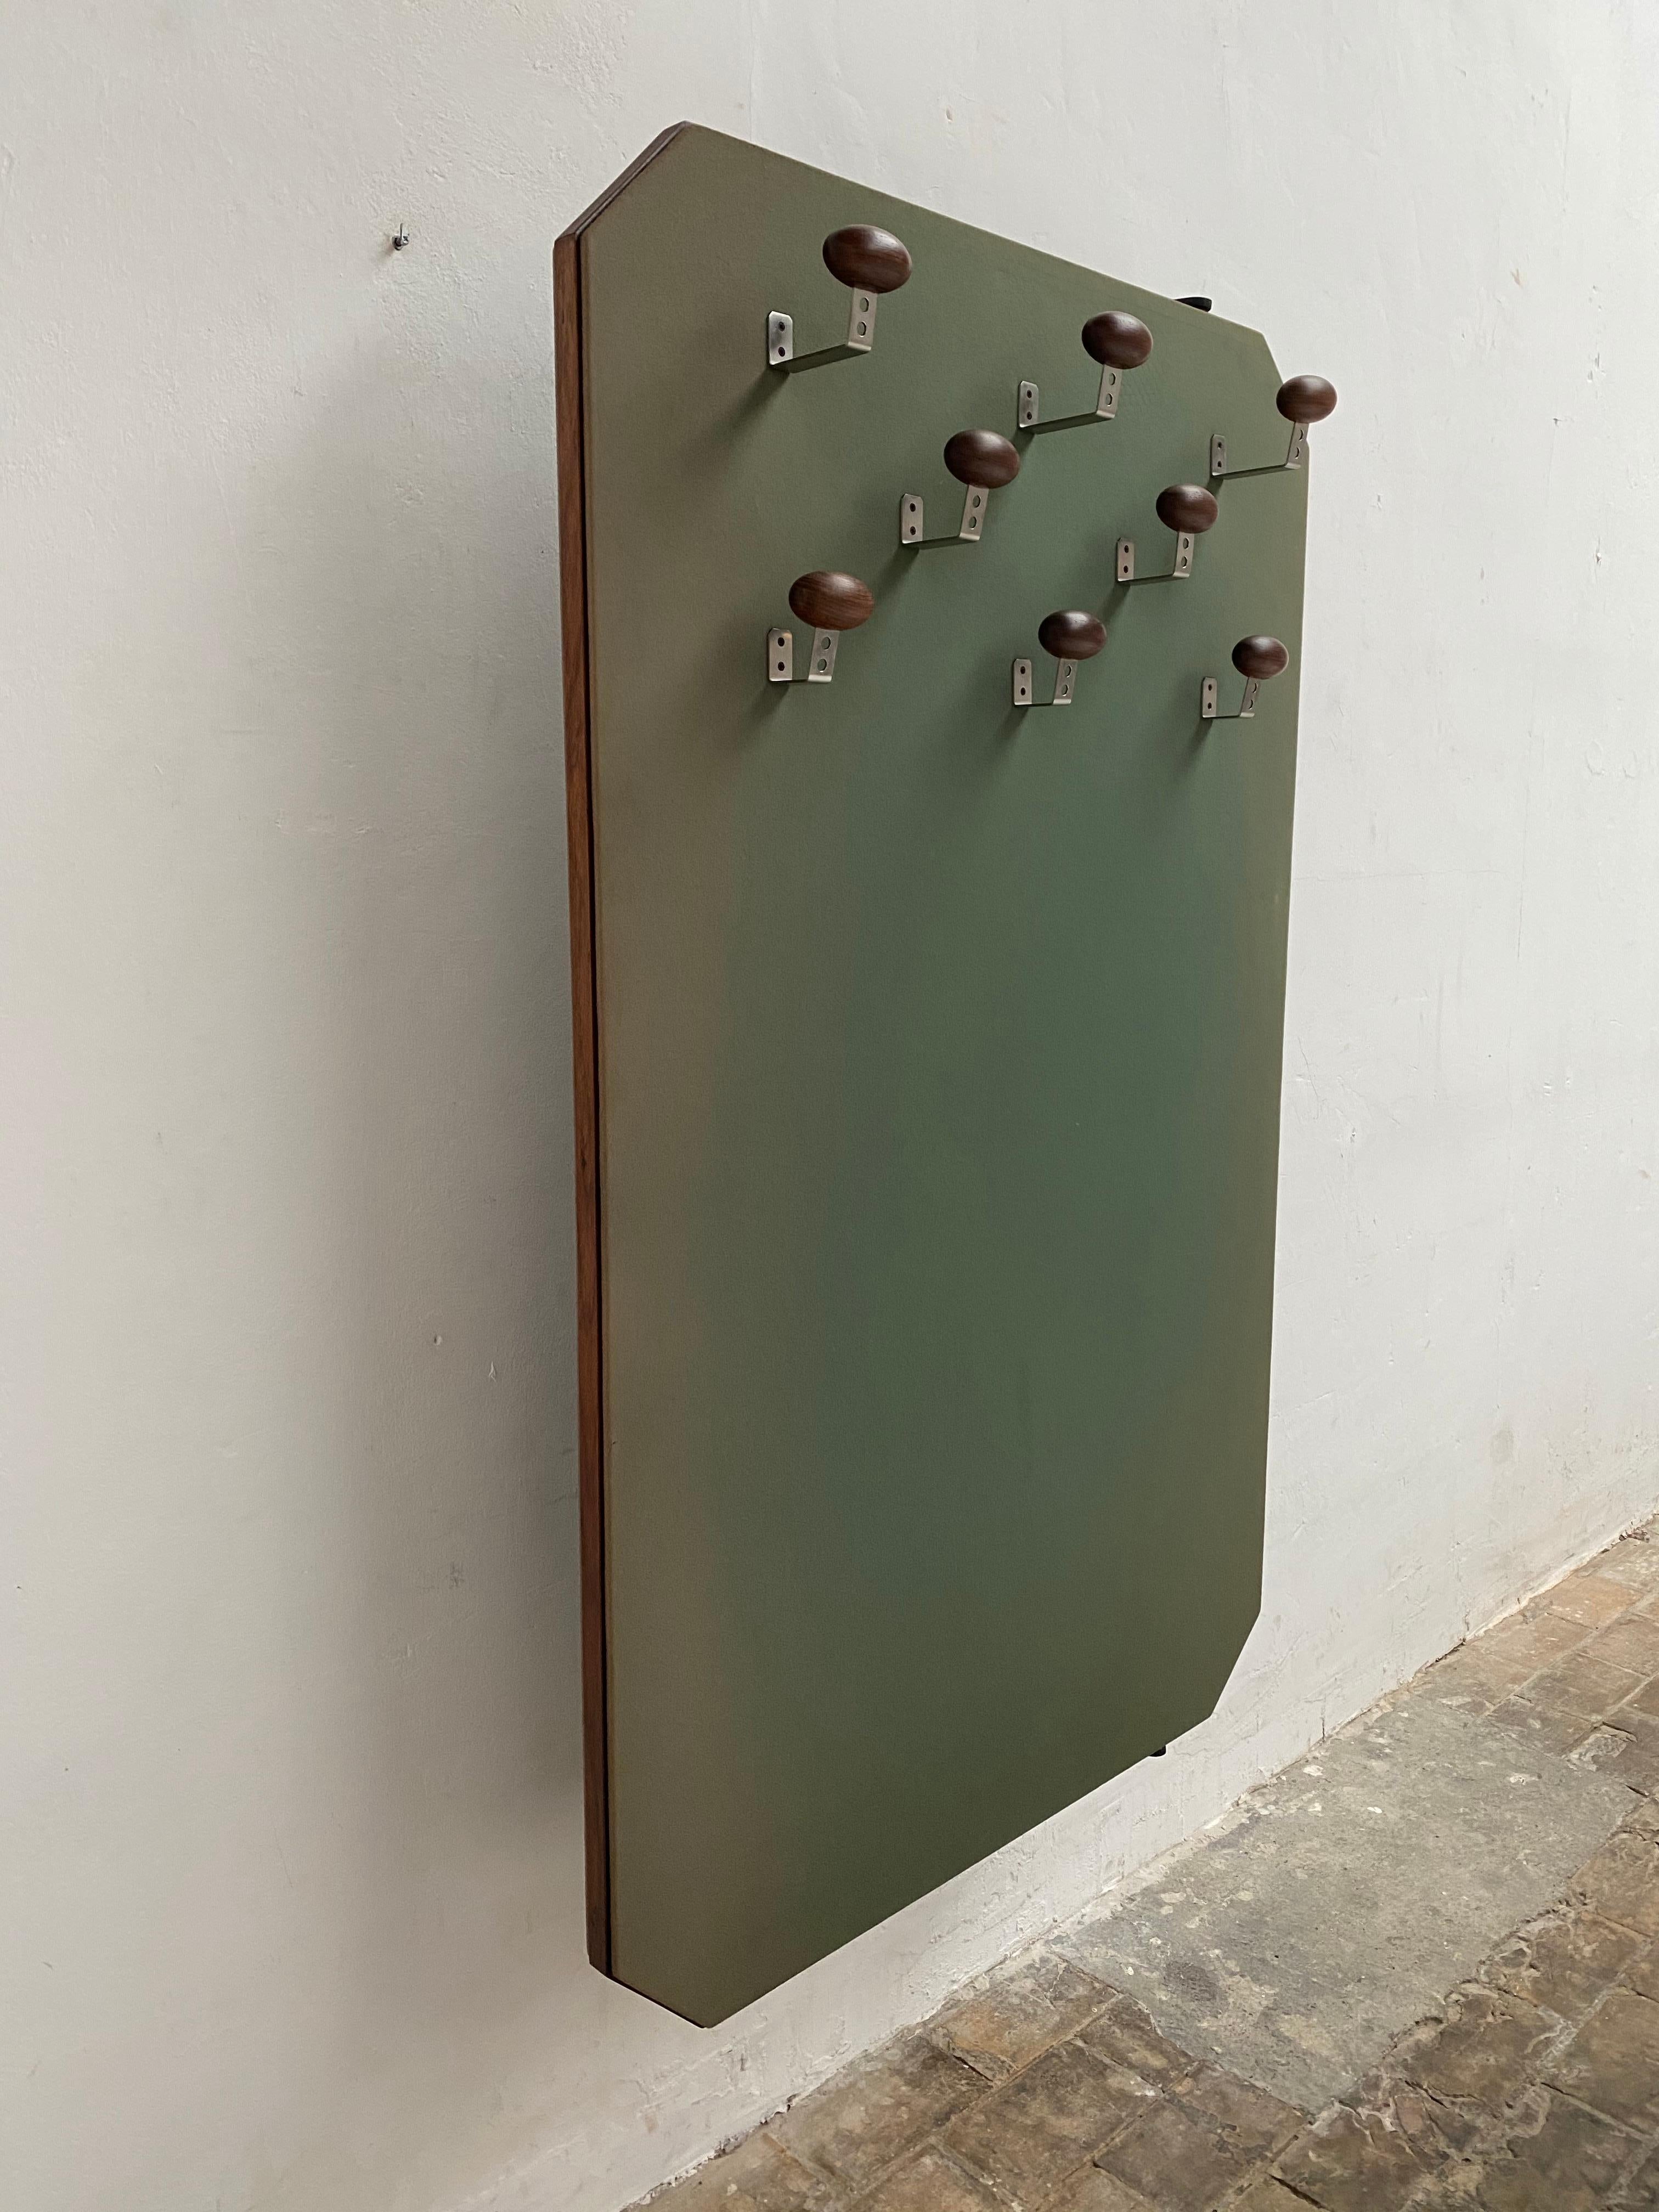 Rare, supremely elegant and innovative 'AT15' revolving panel coatrack designed in 1961 by Osvaldo Borsani for Tecno, Italy. A sophisticated and refined fixture, perfect for a luxurious entrance hall.

The rotating panel is mounted onto two off